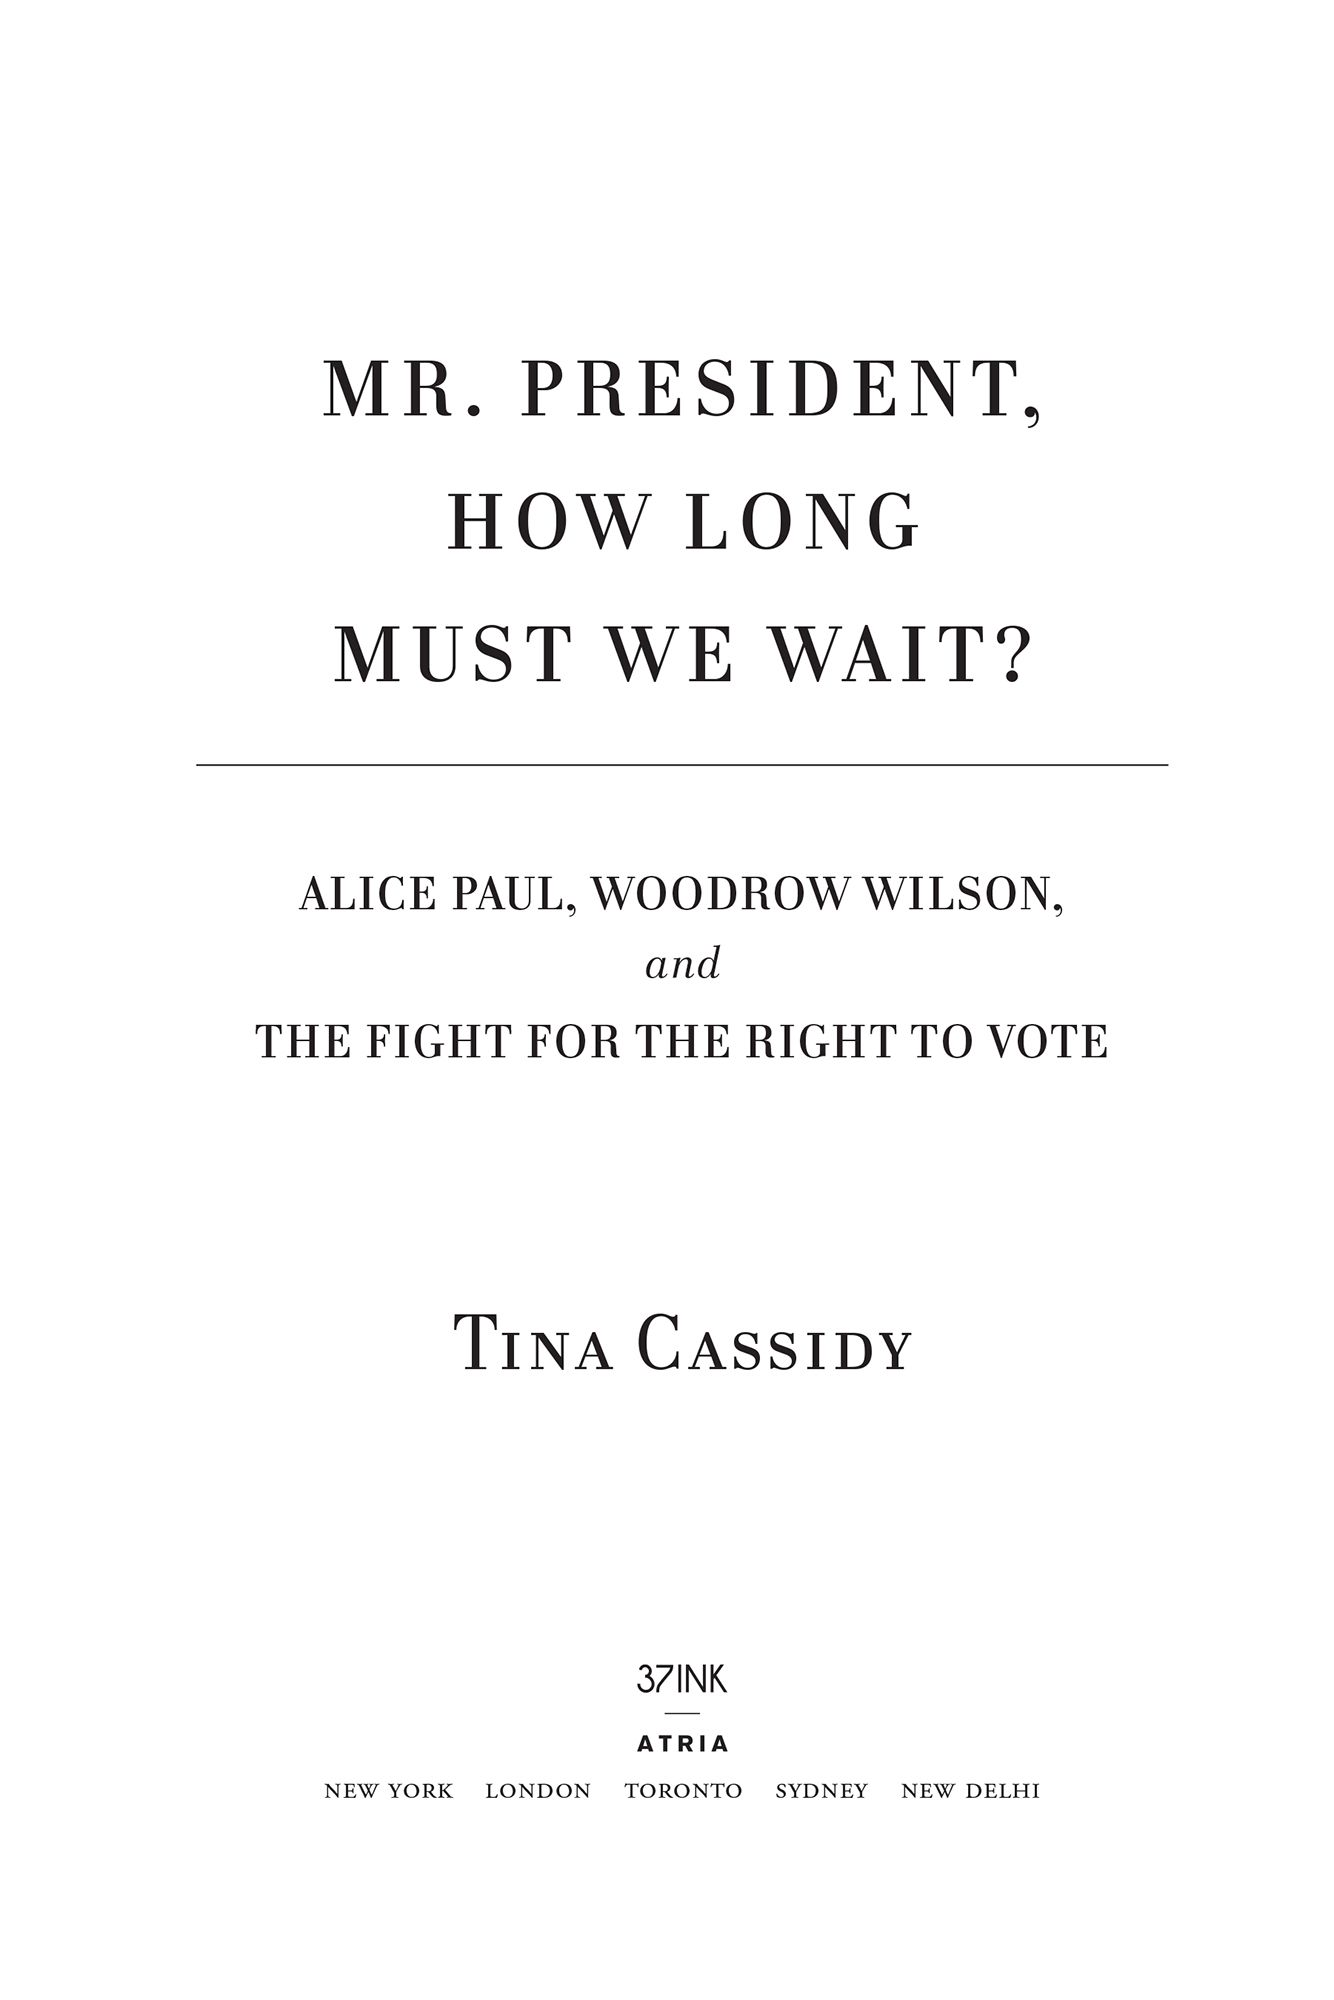 Mr President how long must we wait Alice Paul Woodrow Wilson and the fight for the right to vote - image 1